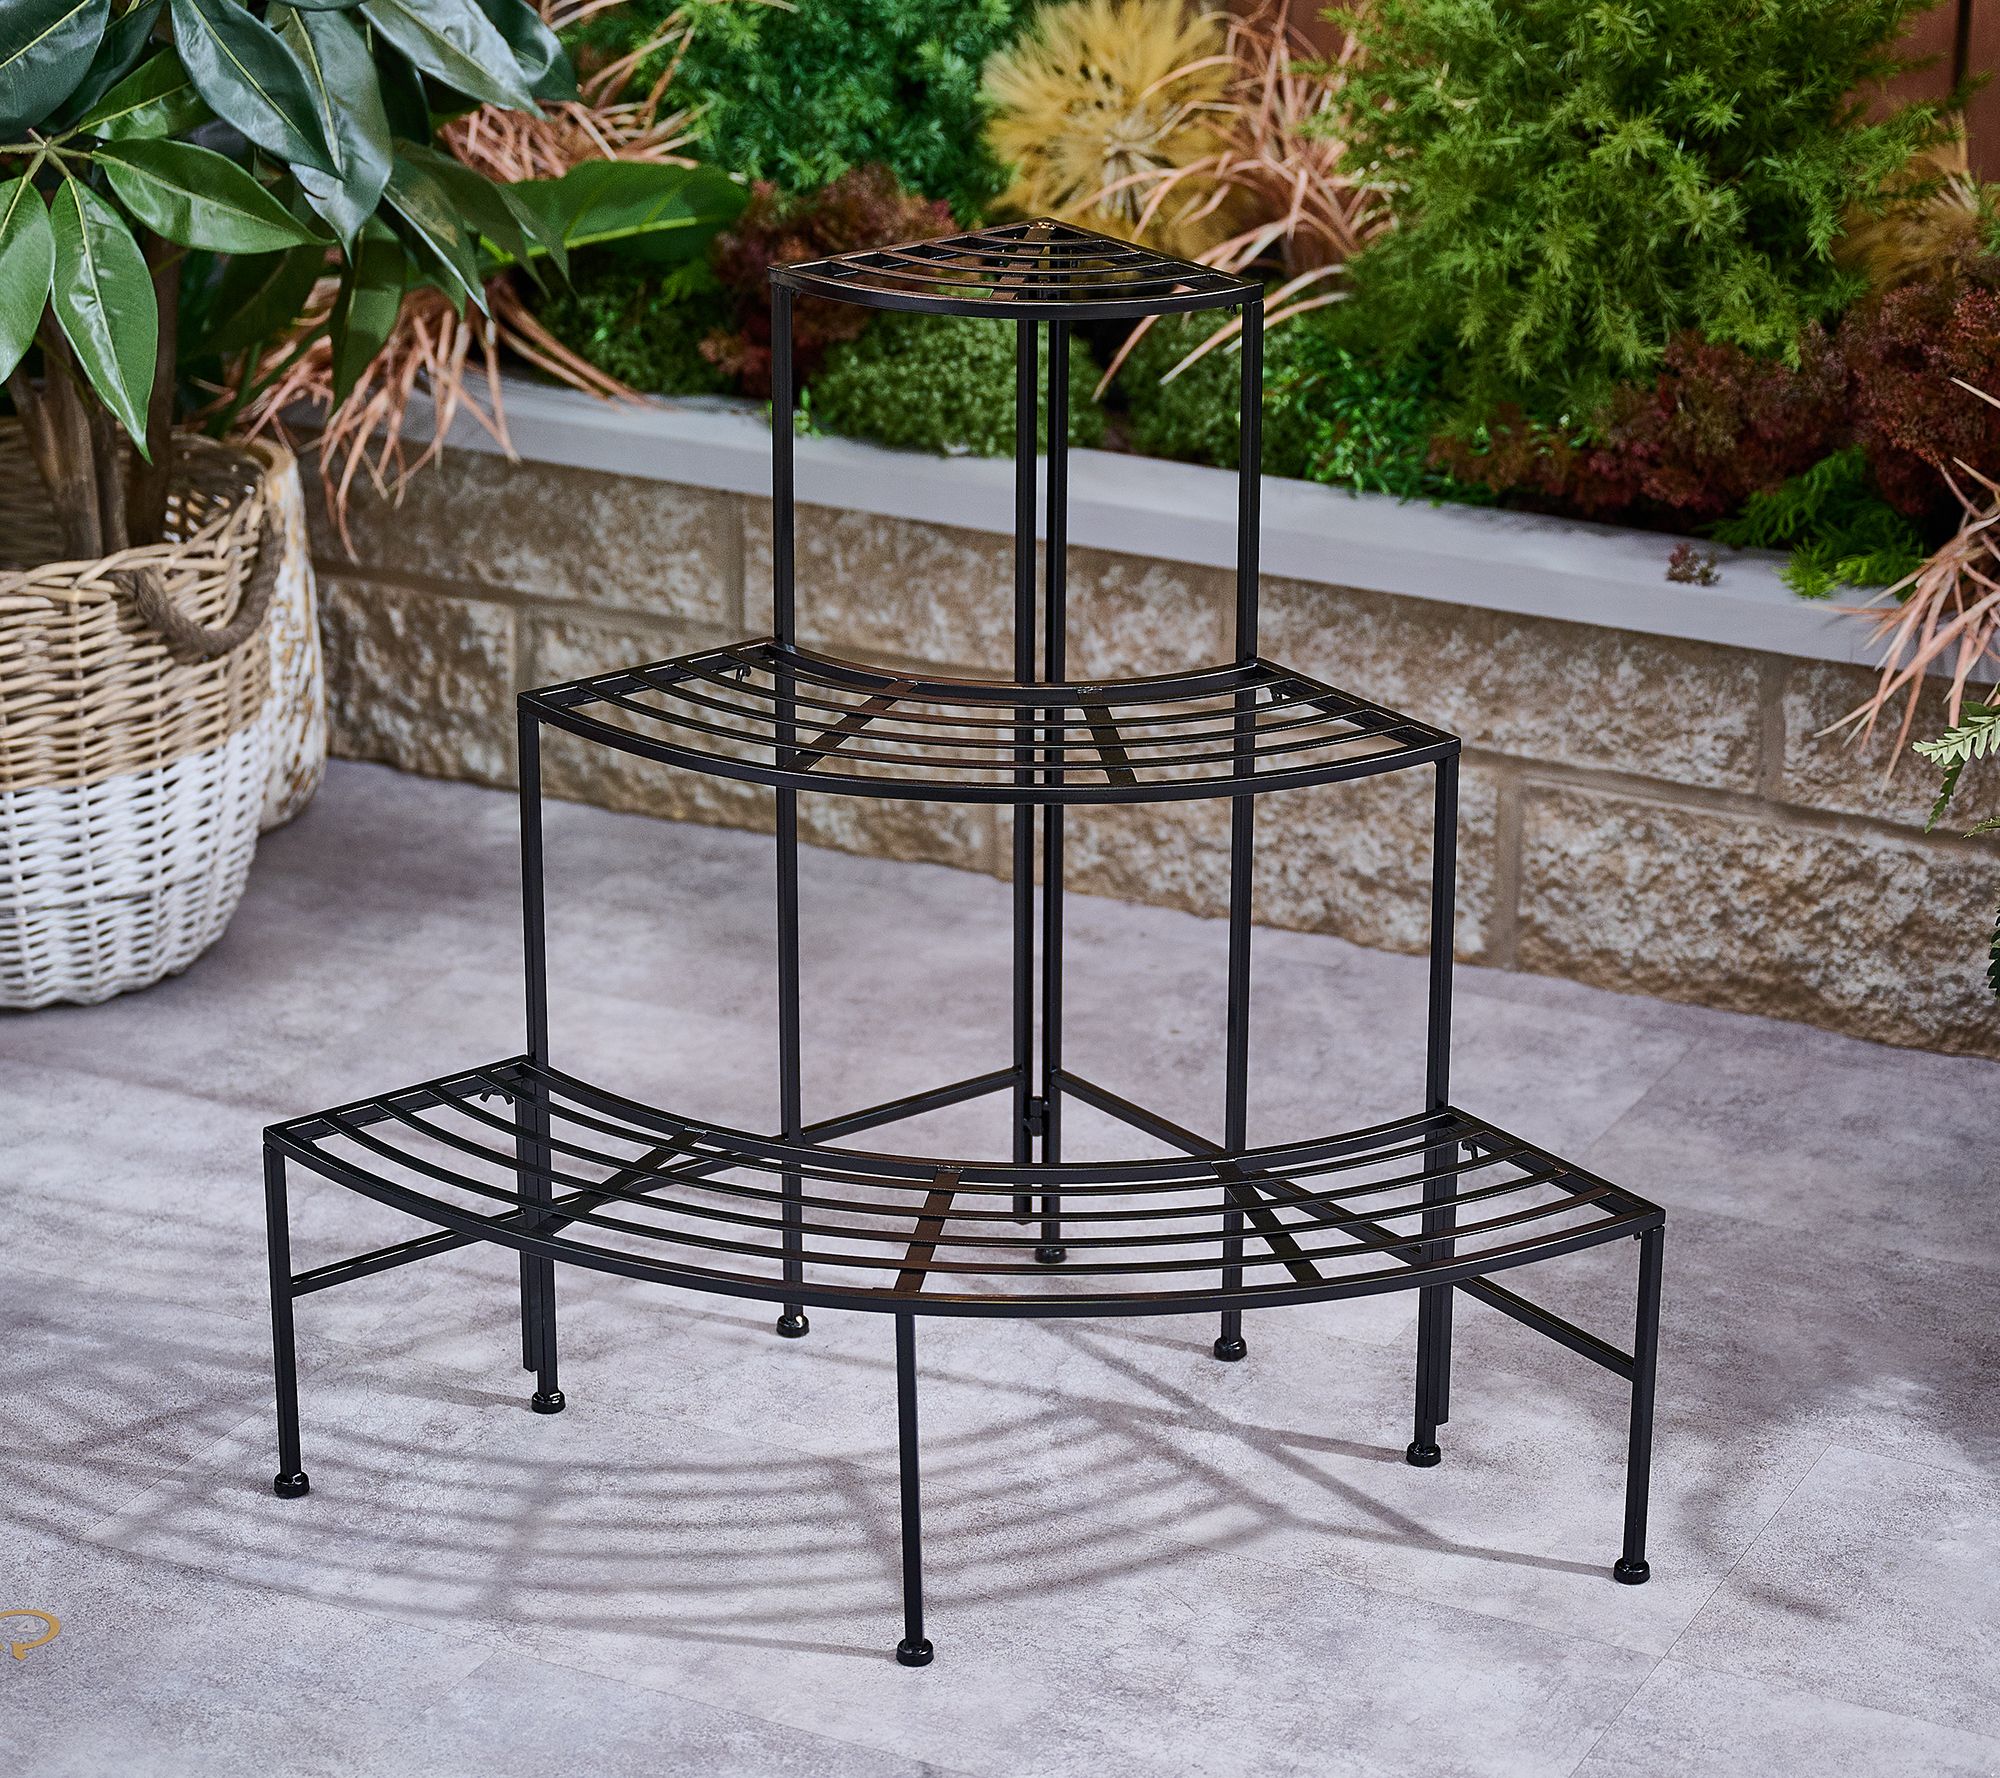 28.5 Tall 3-Tier Metal Plant Stand by Linda Vater